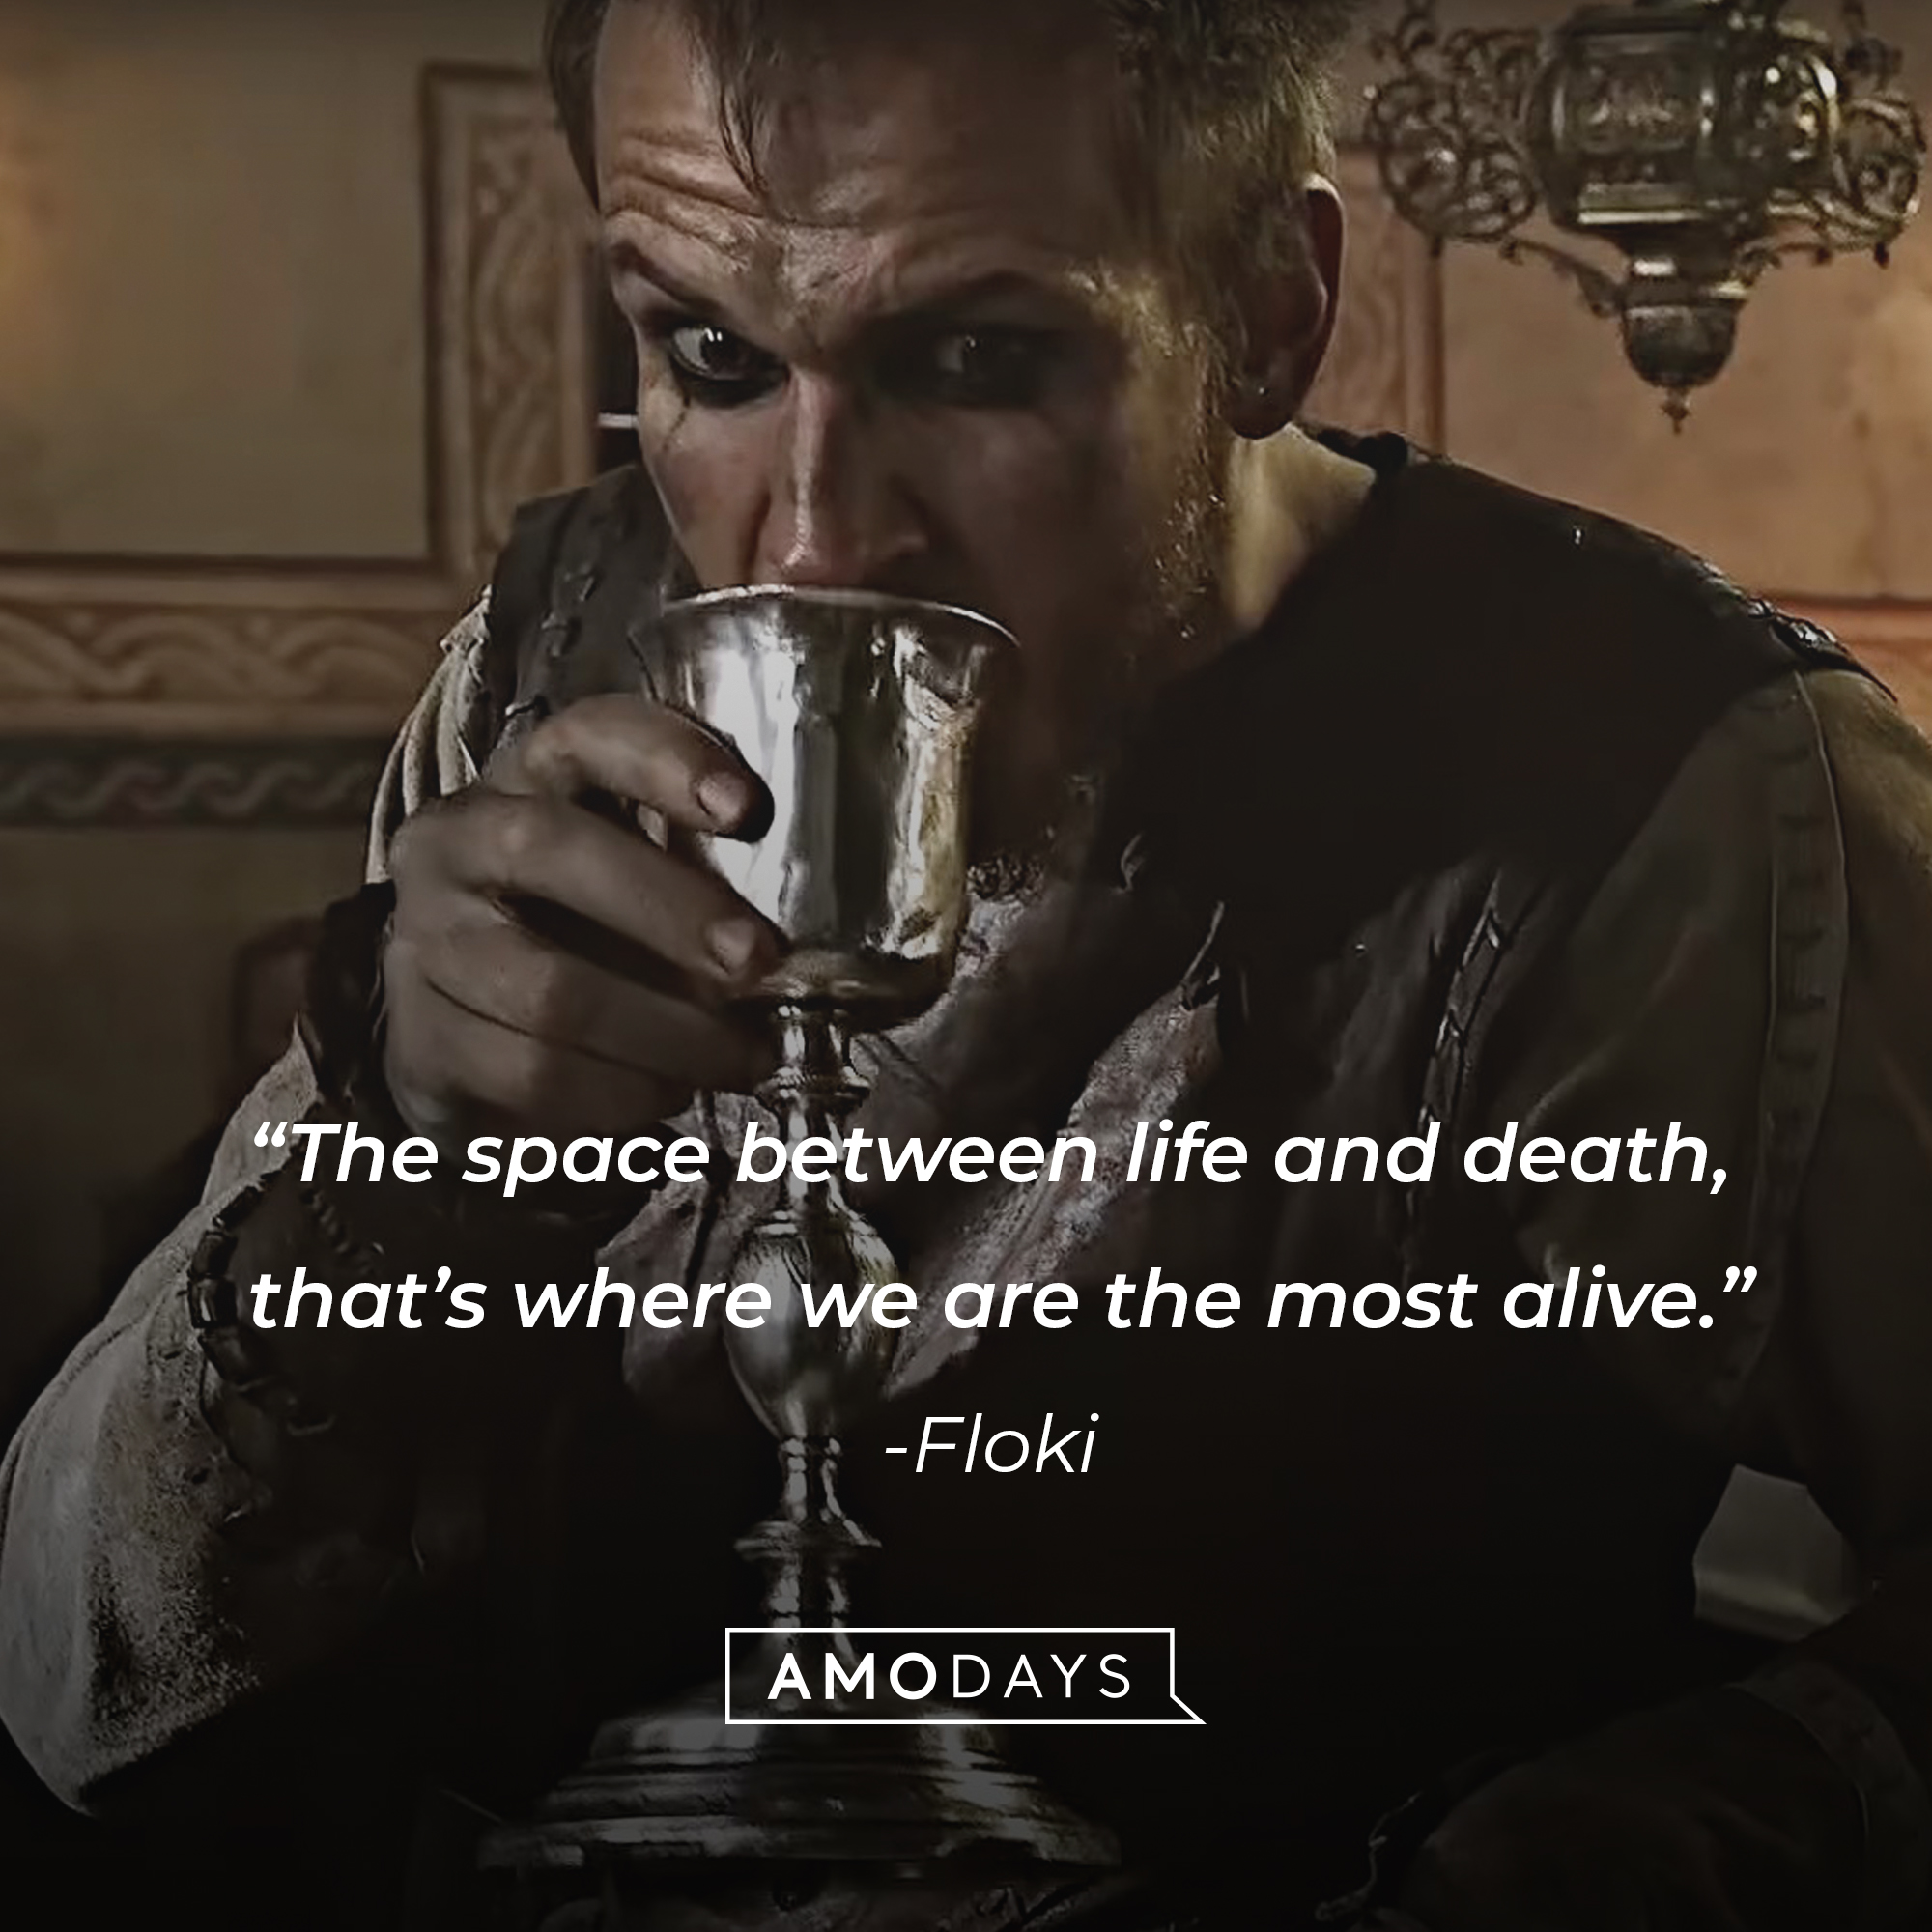 An image of Floki with his quote:“The space between life and death, that’s where we are the most alive.” | Source: facebook.com/Vikings